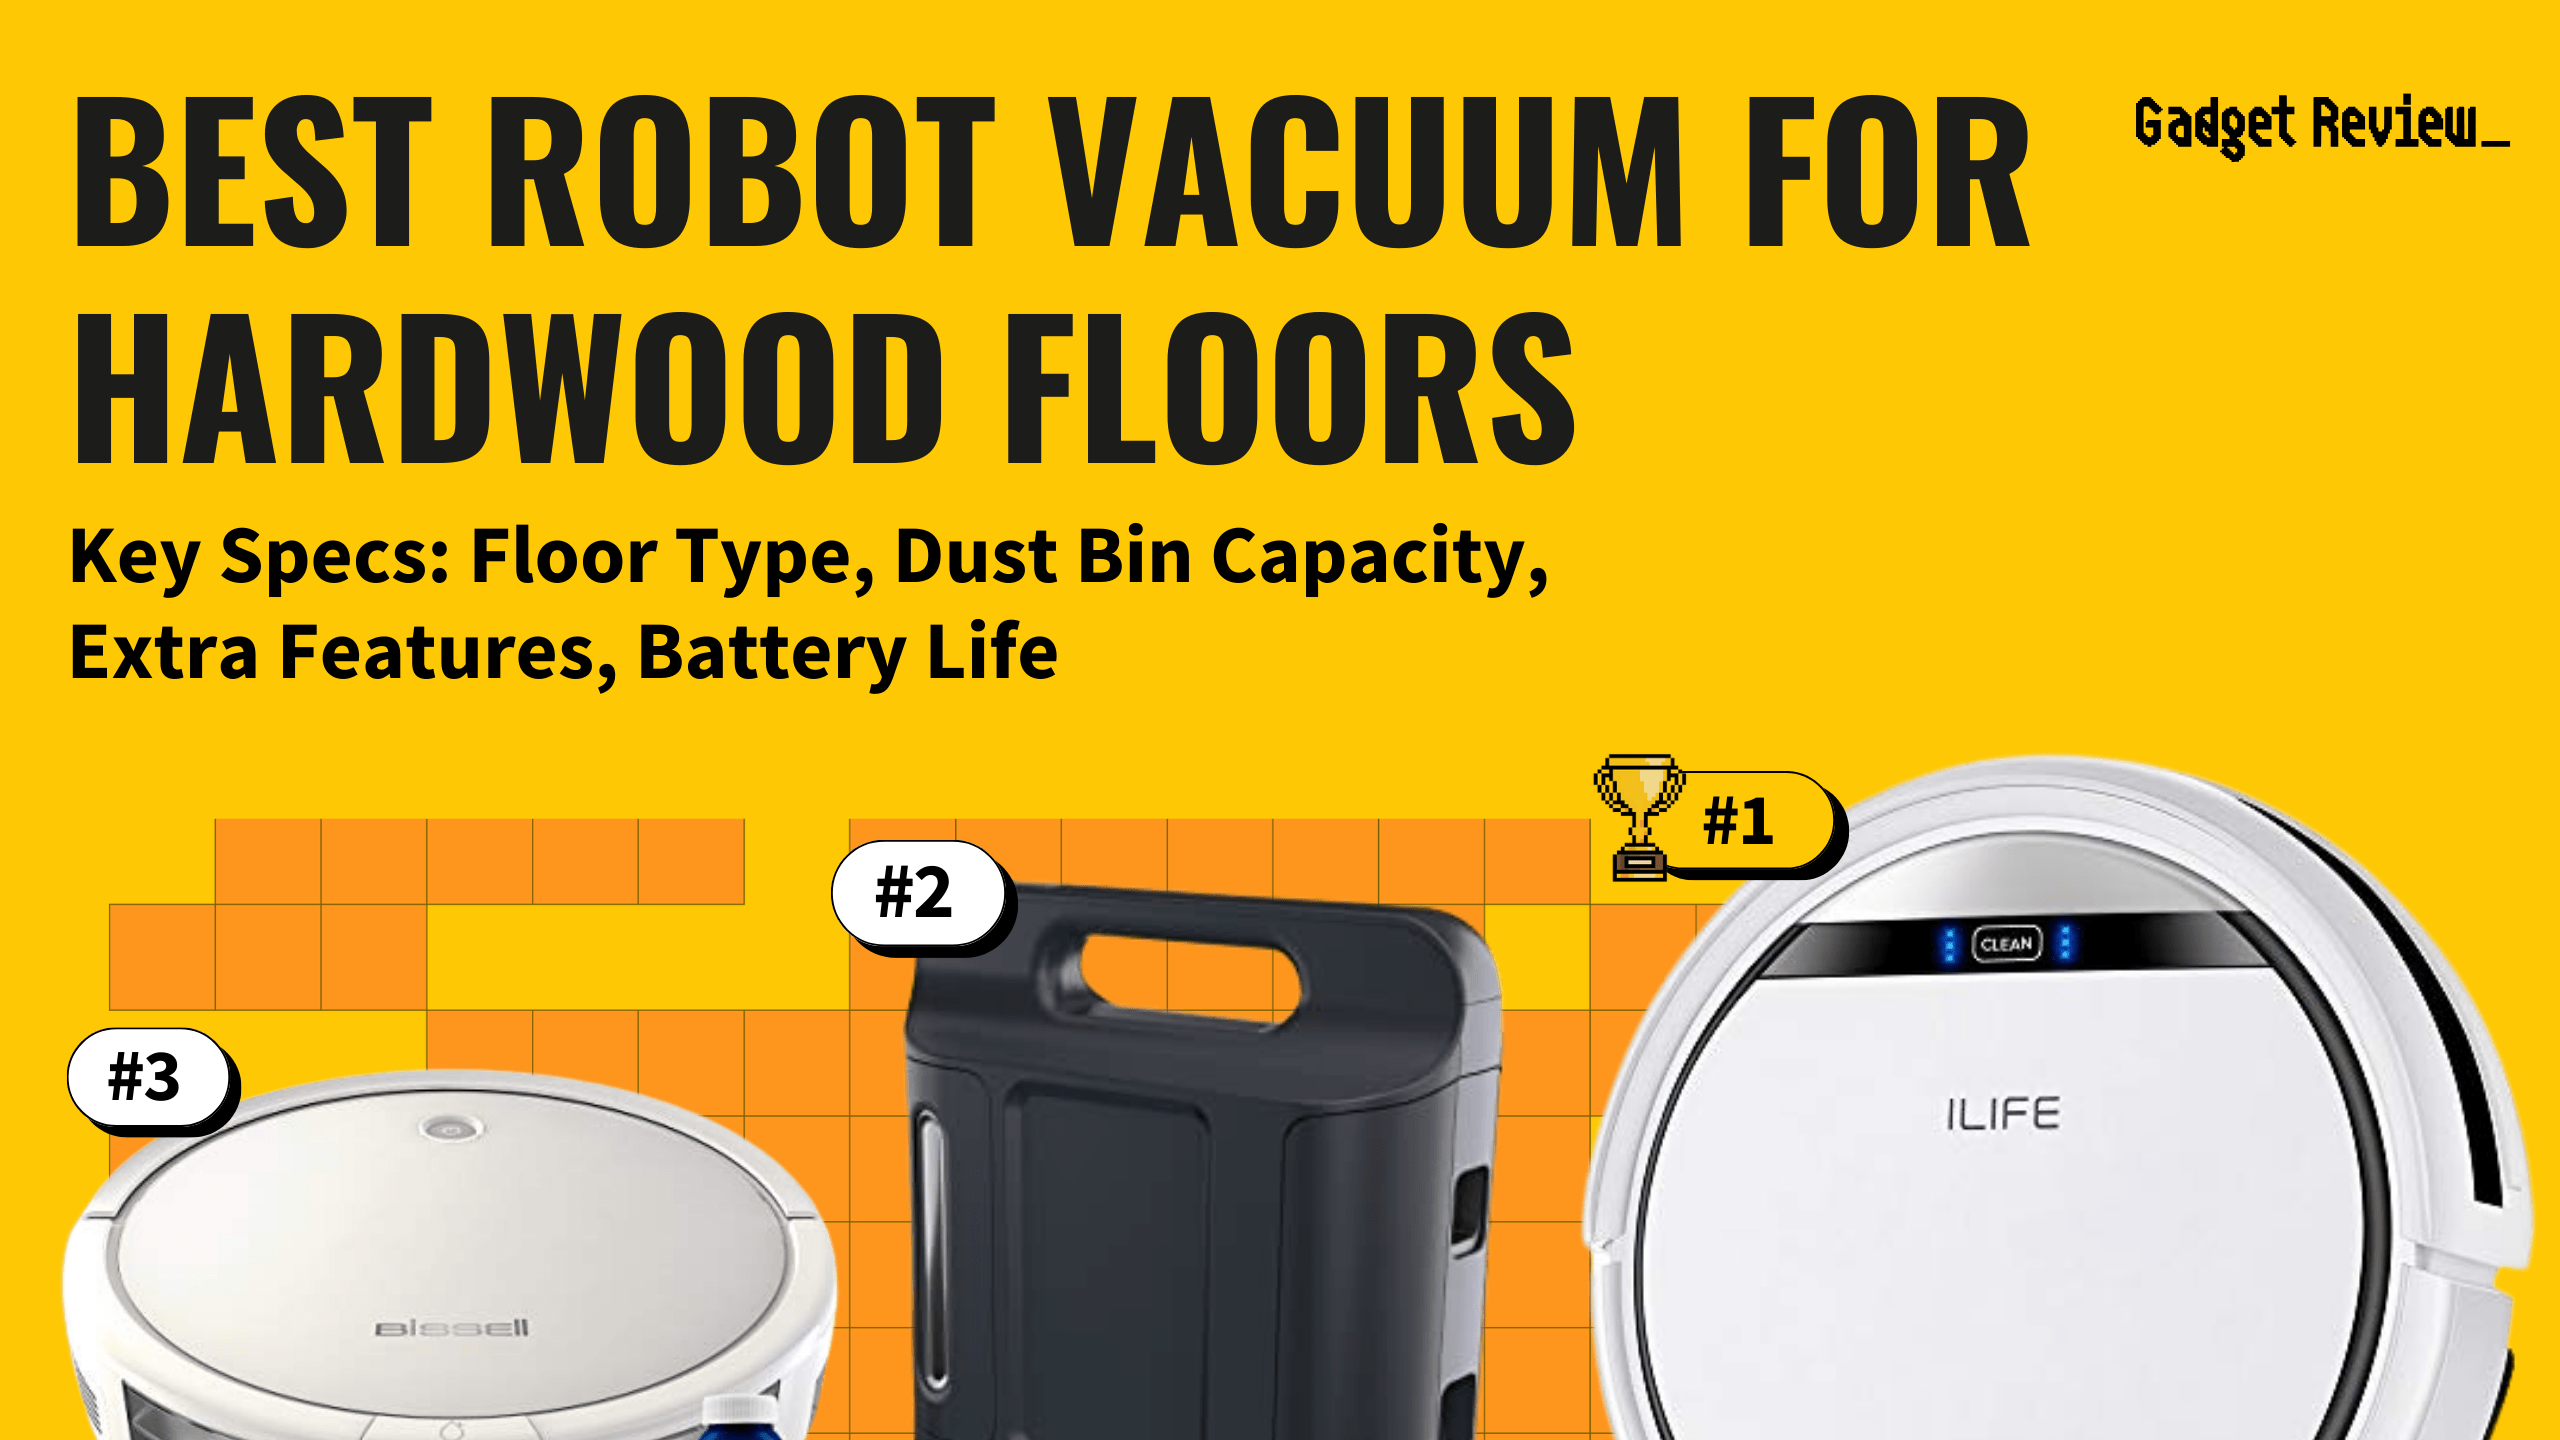 best robot vacuum for hardwood floors guide that shows the top best vacuum cleaner model